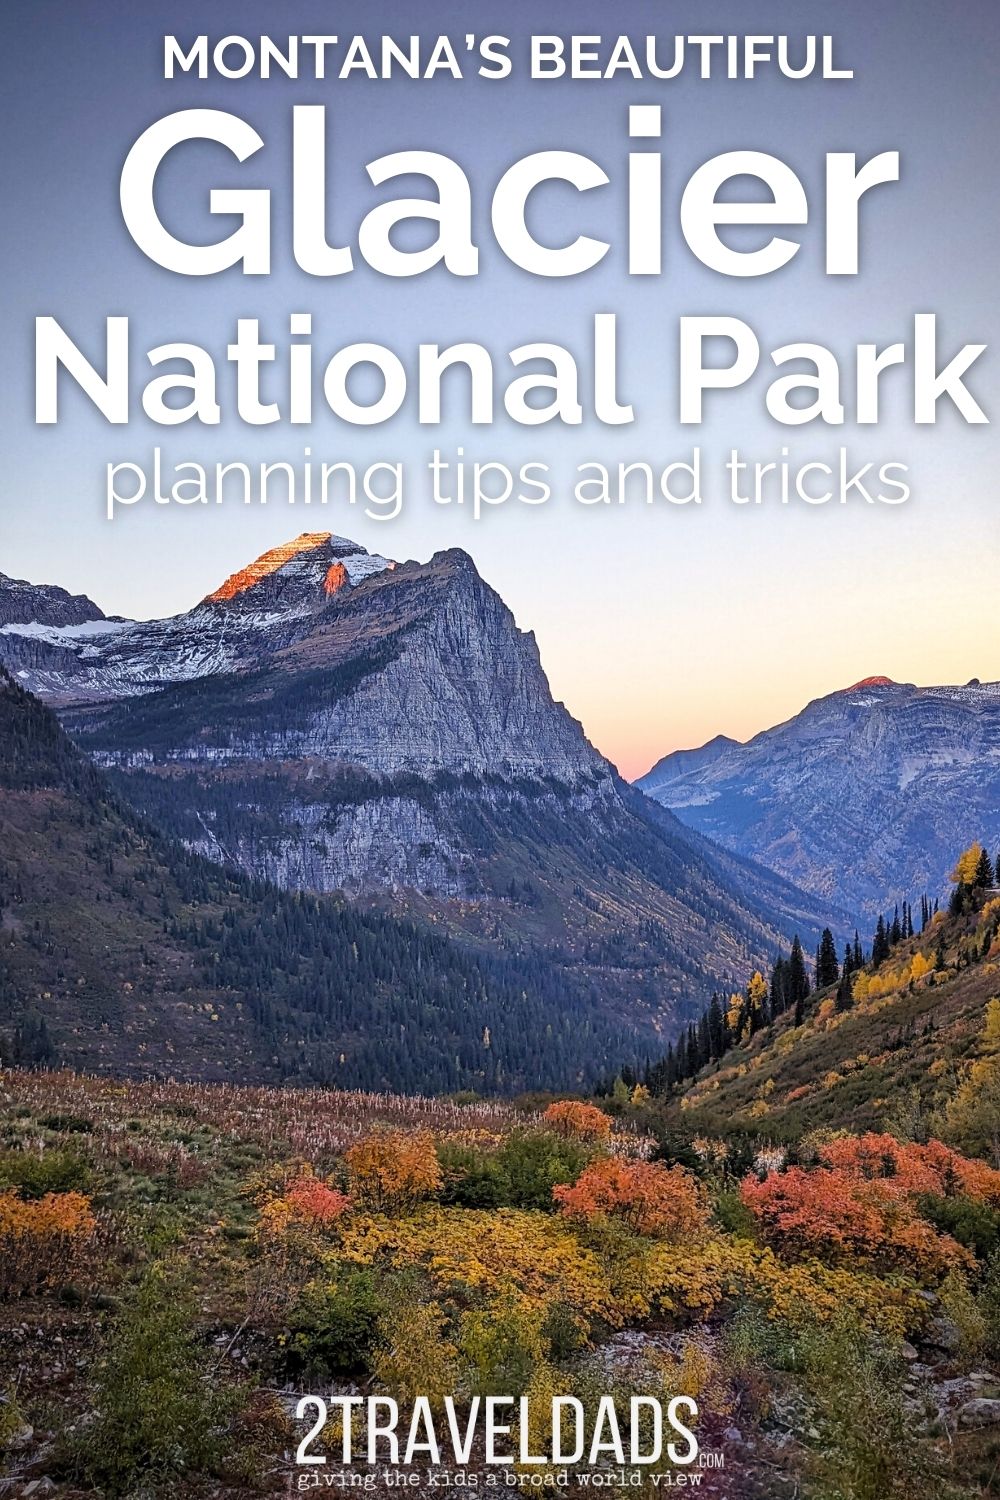 Planning a trip to Glacier National Park can be easy if you understand the basics of the park. We have all the tips and simple information for having a great visit to Montana's Glacier NP.